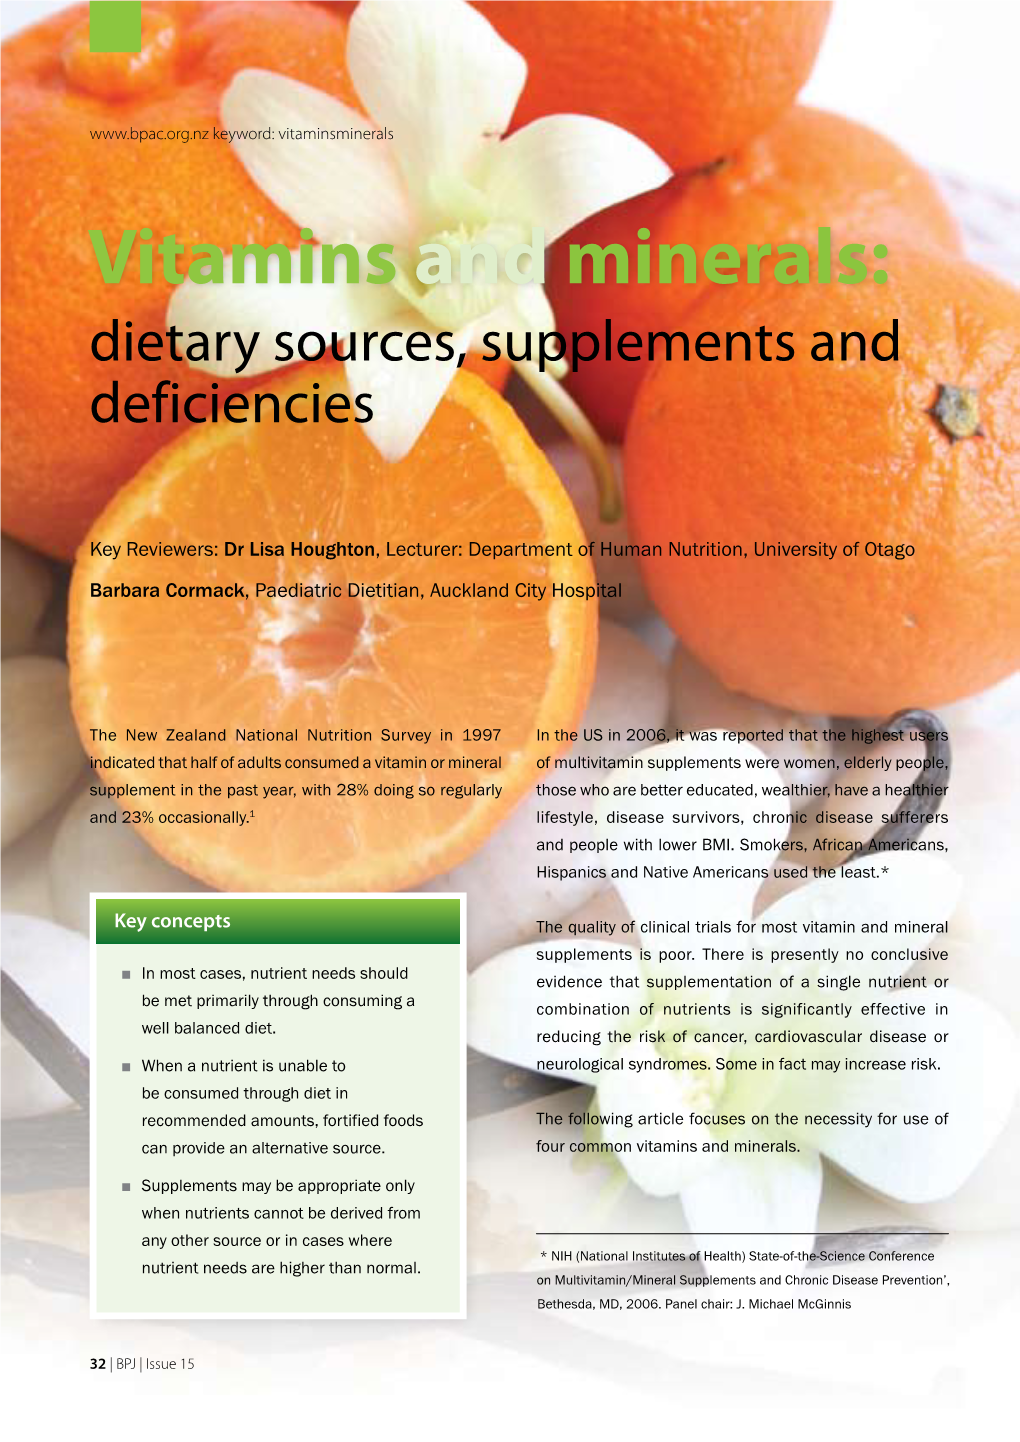 Vitamins and Minerals: Dietary Sources, Supplements and Deficiencies